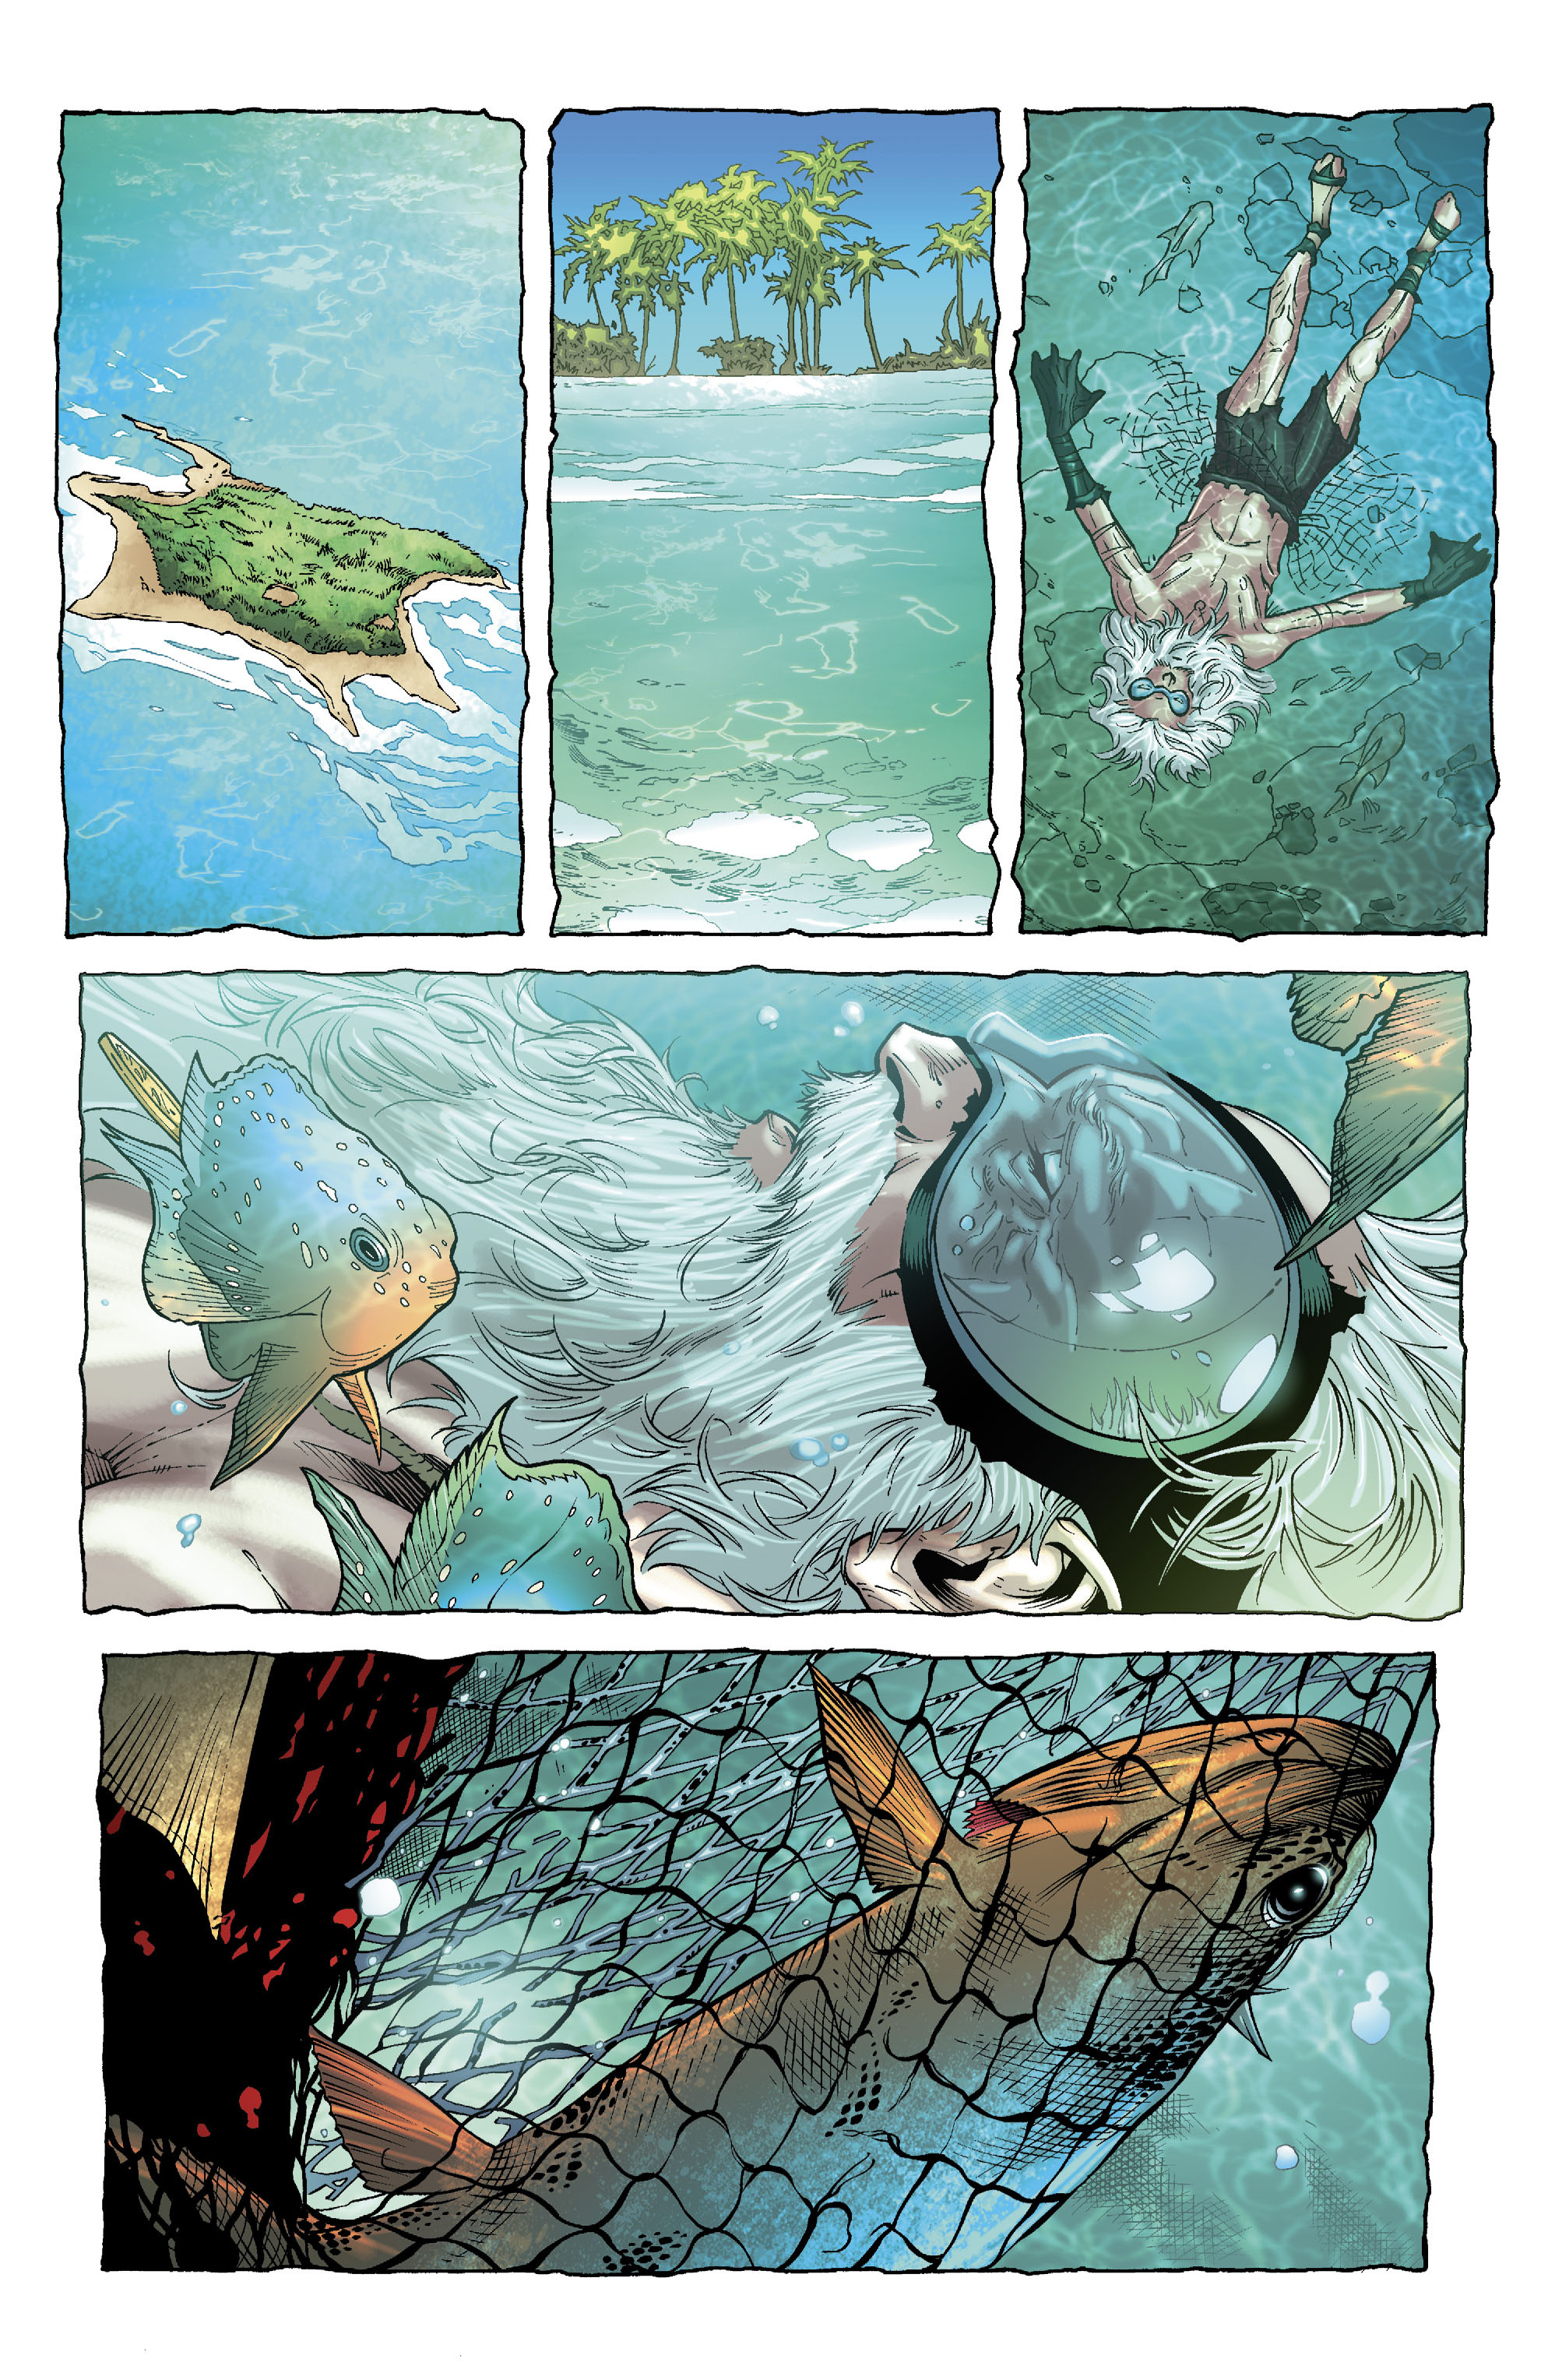 Astro City (2013-): Chapter 42 - Page 2